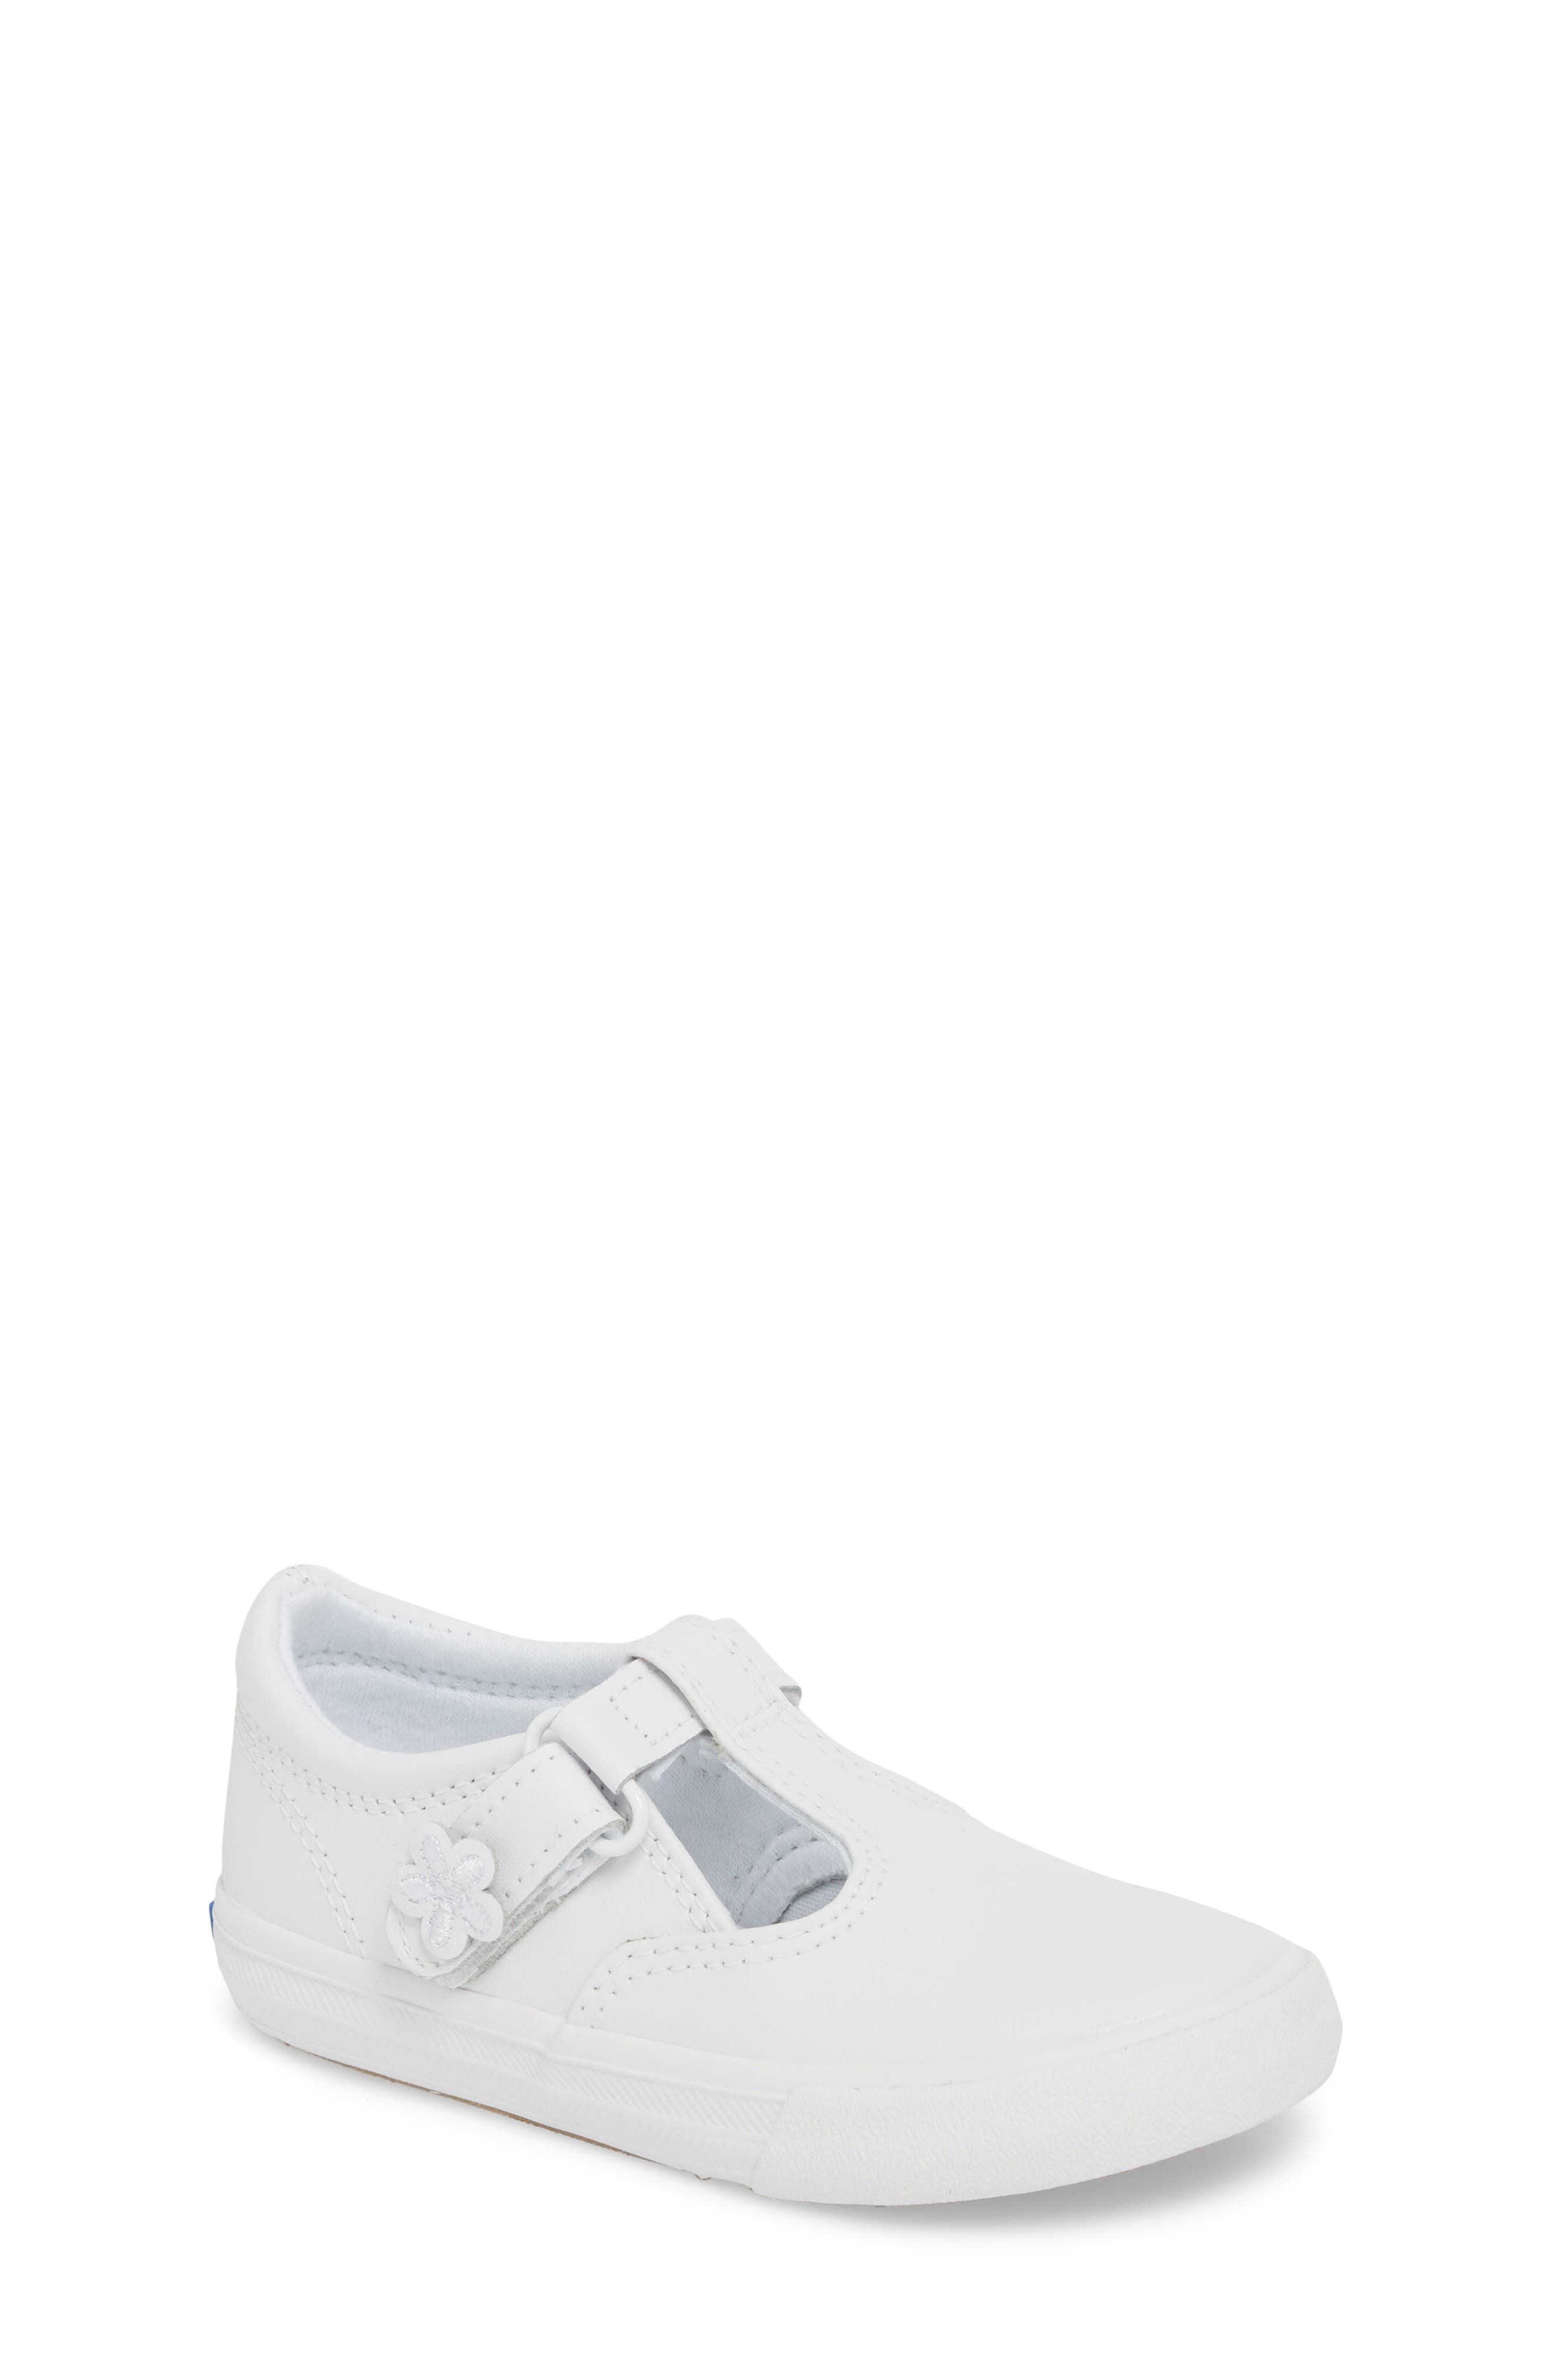 keds shoes for toddlers